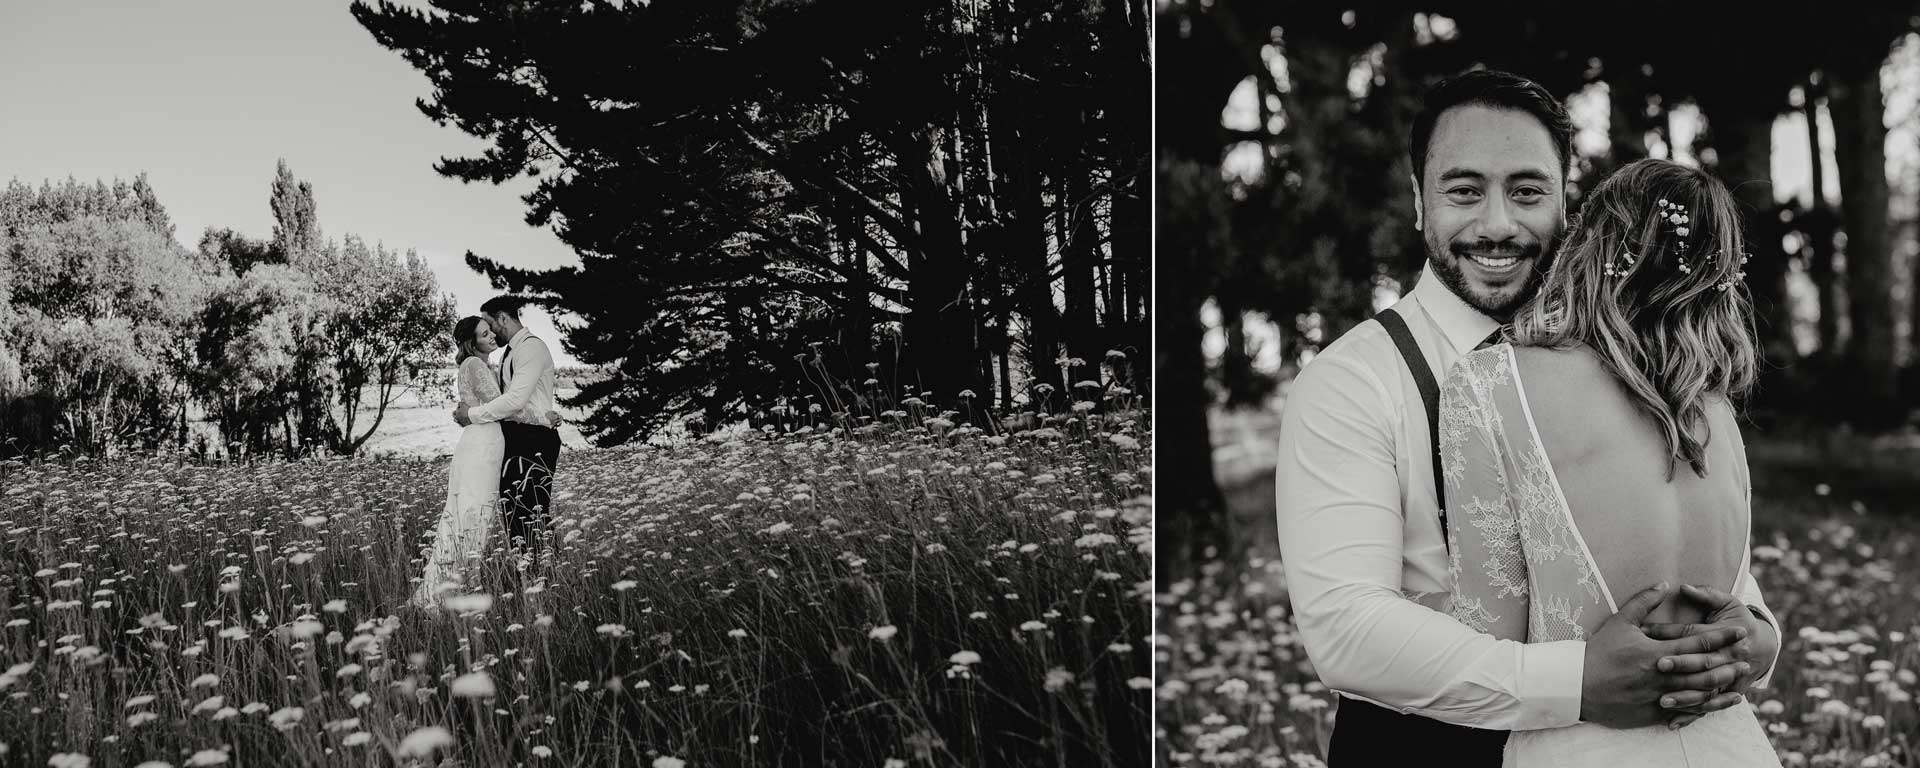 bride and groom wedding portraits in long grass auckland photos by sarah weber photography